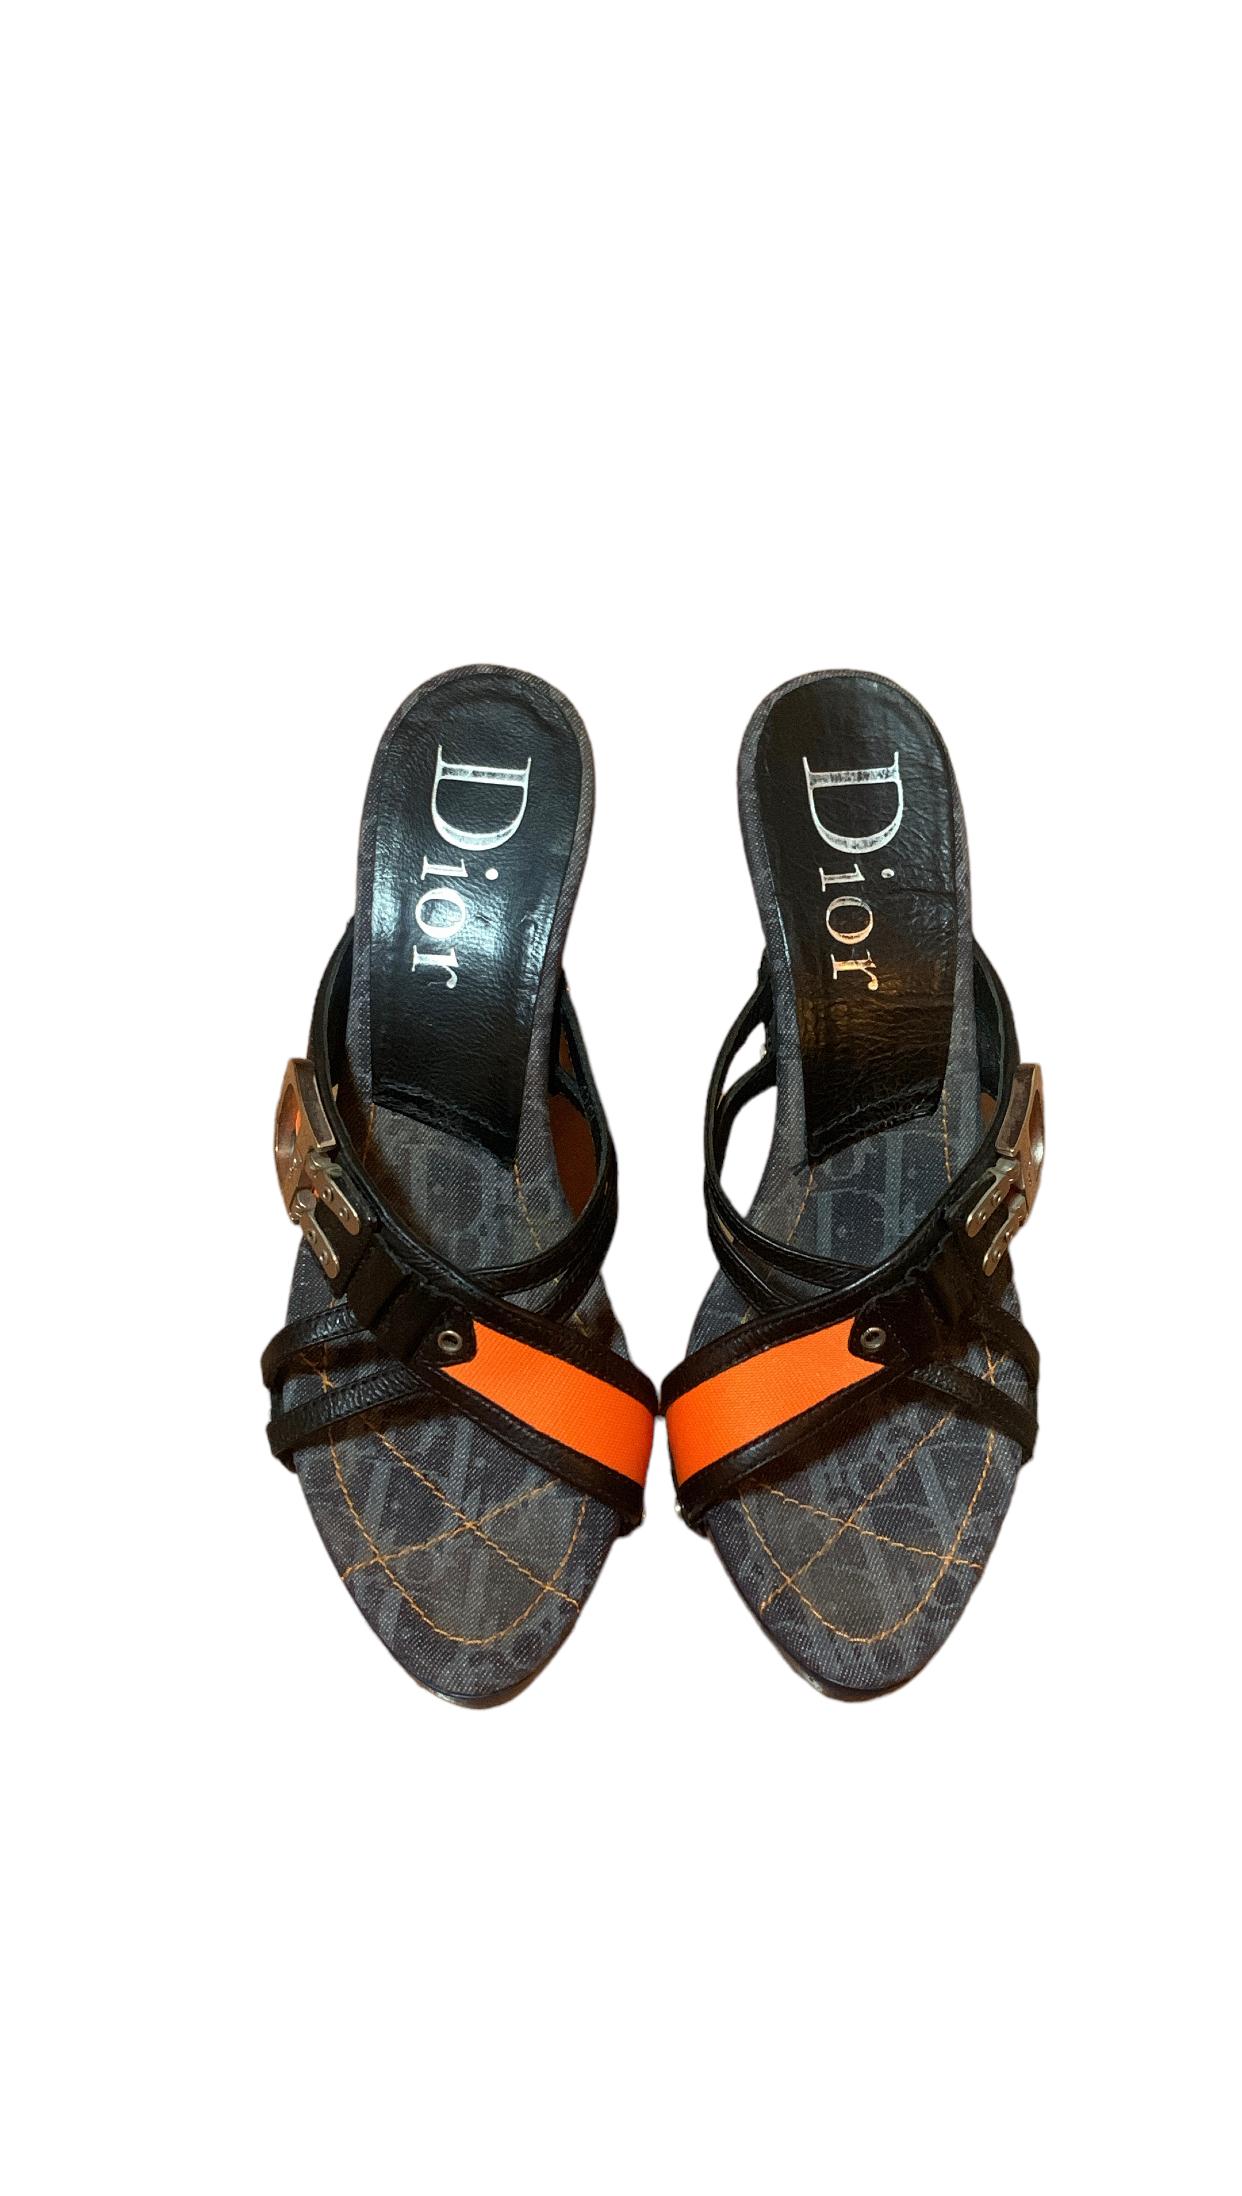 Step into the world of timeless elegance with these vintage Christian Dior Flight Line Monogram Denim Mules. Crafted with a perfect blend of leather and denim, these mules feature the iconic monogram design discreetly on the inside sole. Their